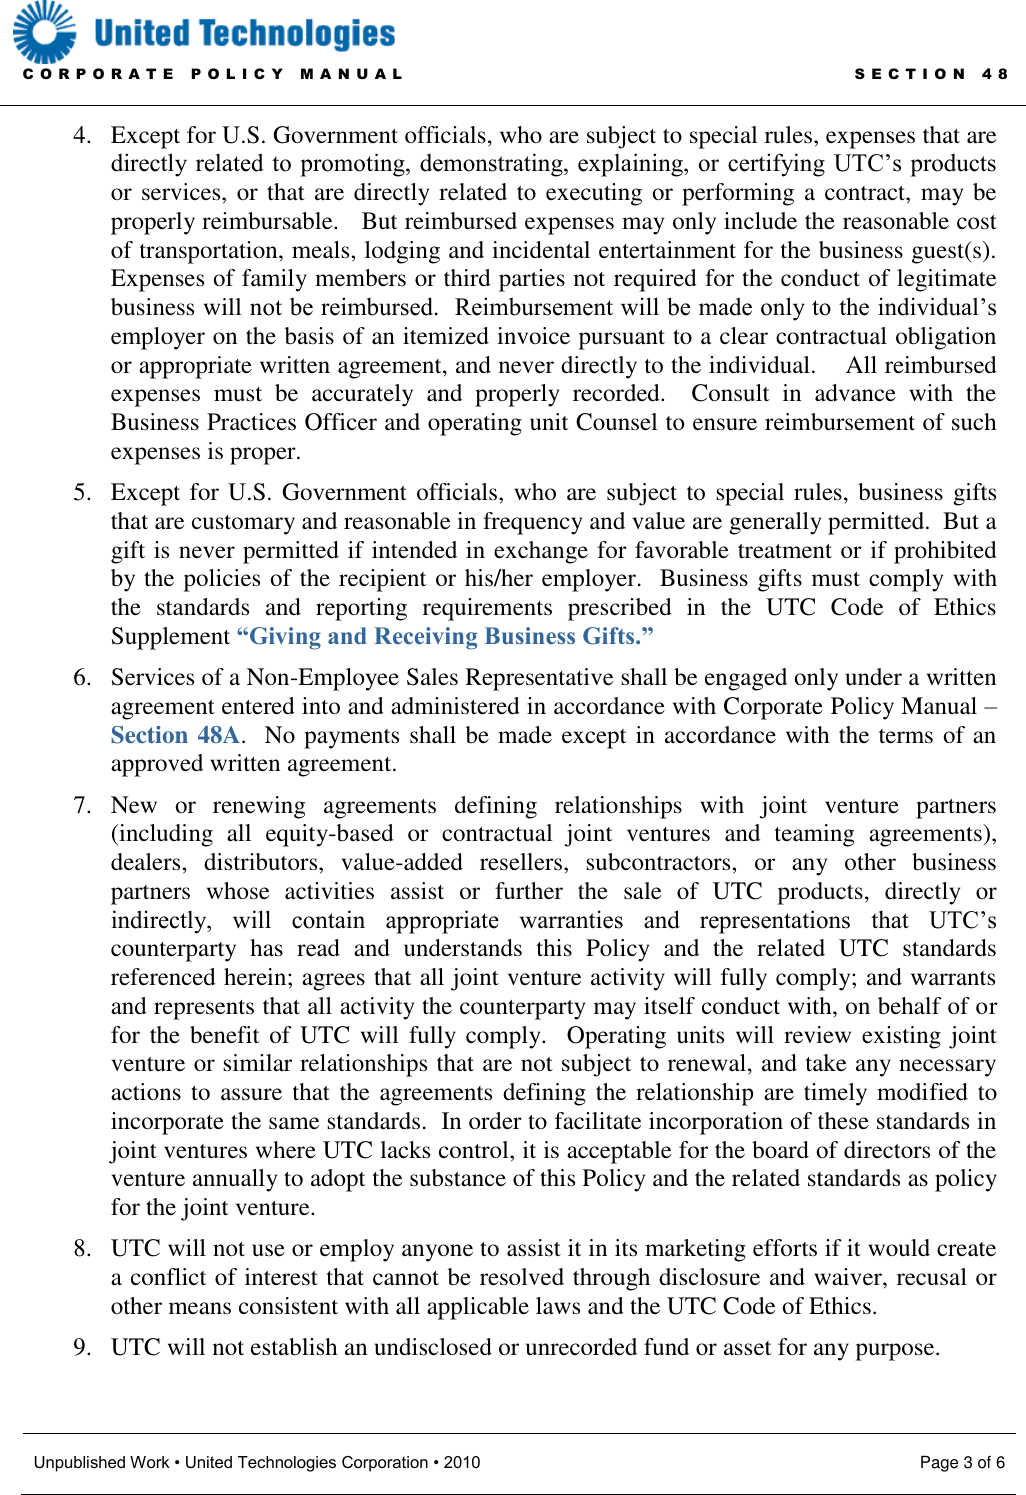 Page 3 of 6 - Corporate Policy Manual Section 48 - Business Practices Organization Improper Payments English